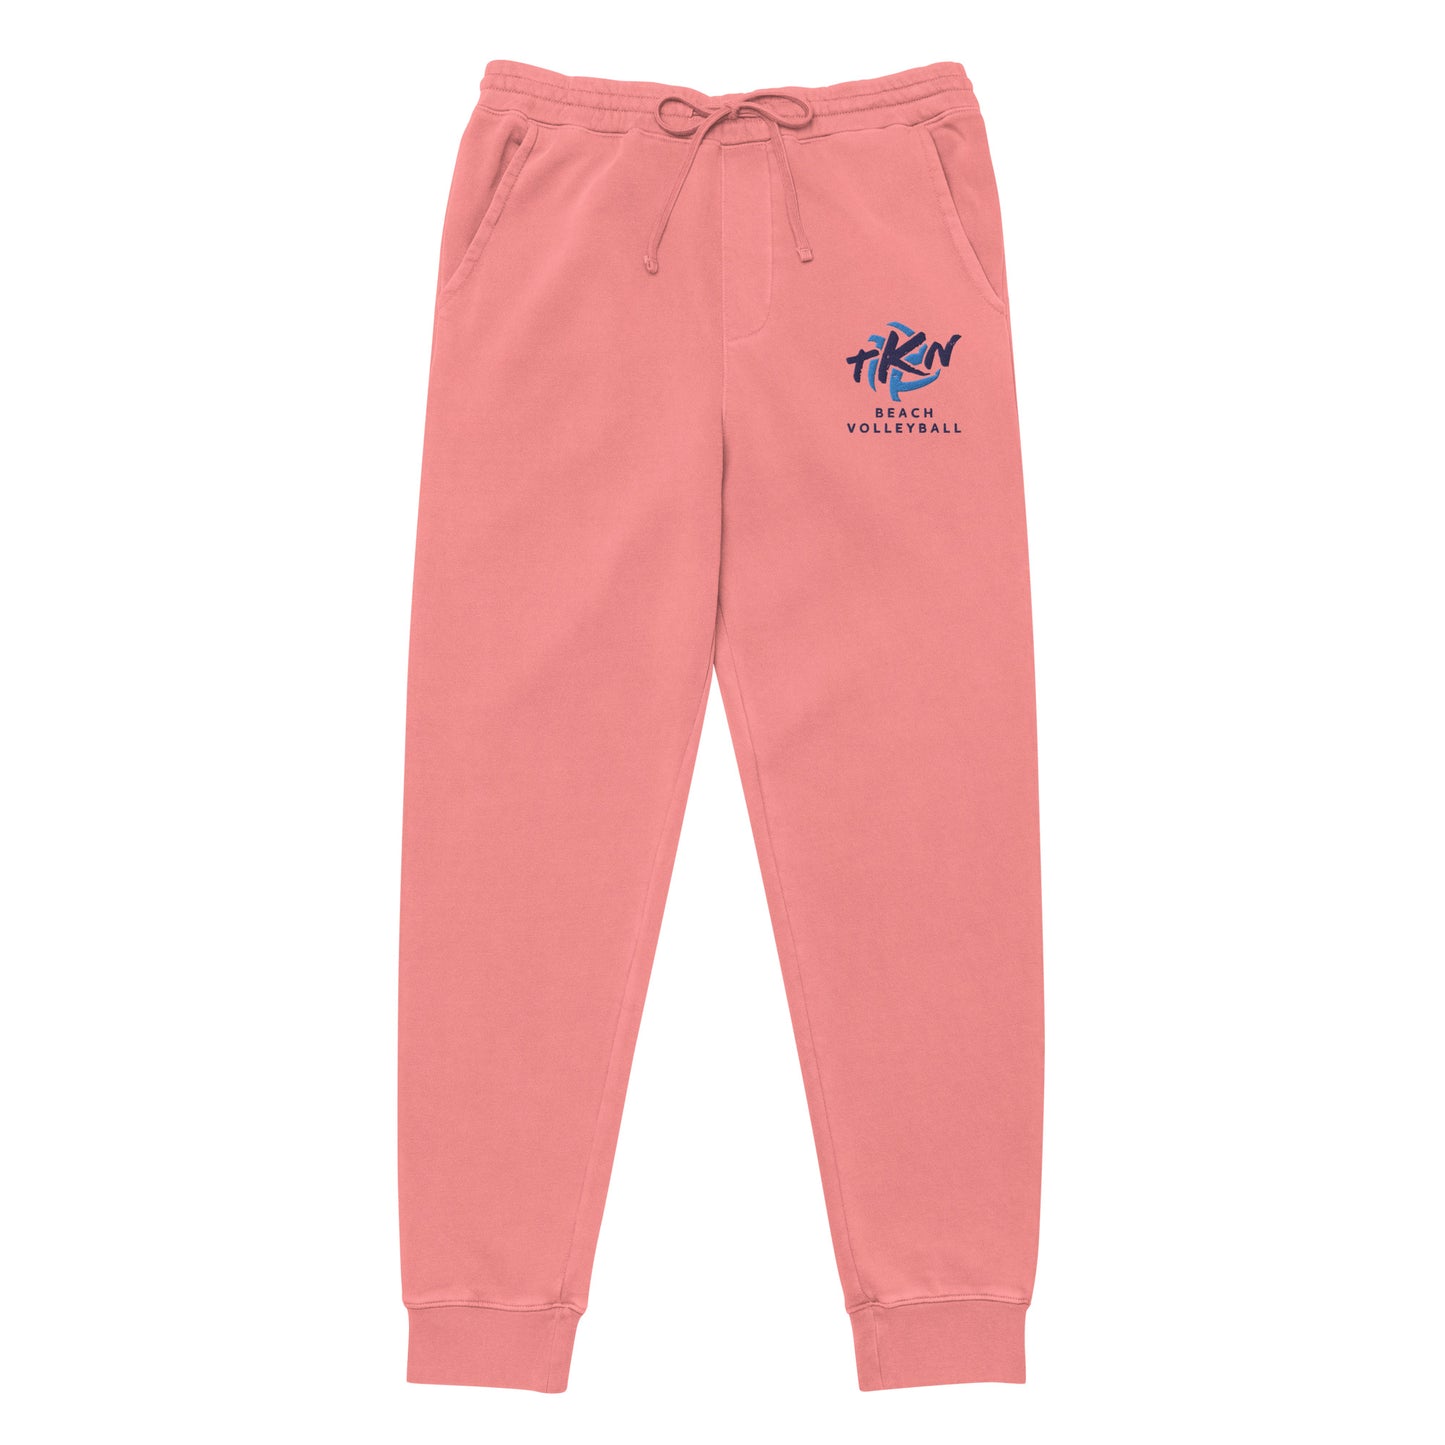 TKN Embroidered Unisex pigment-dyed sweatpants